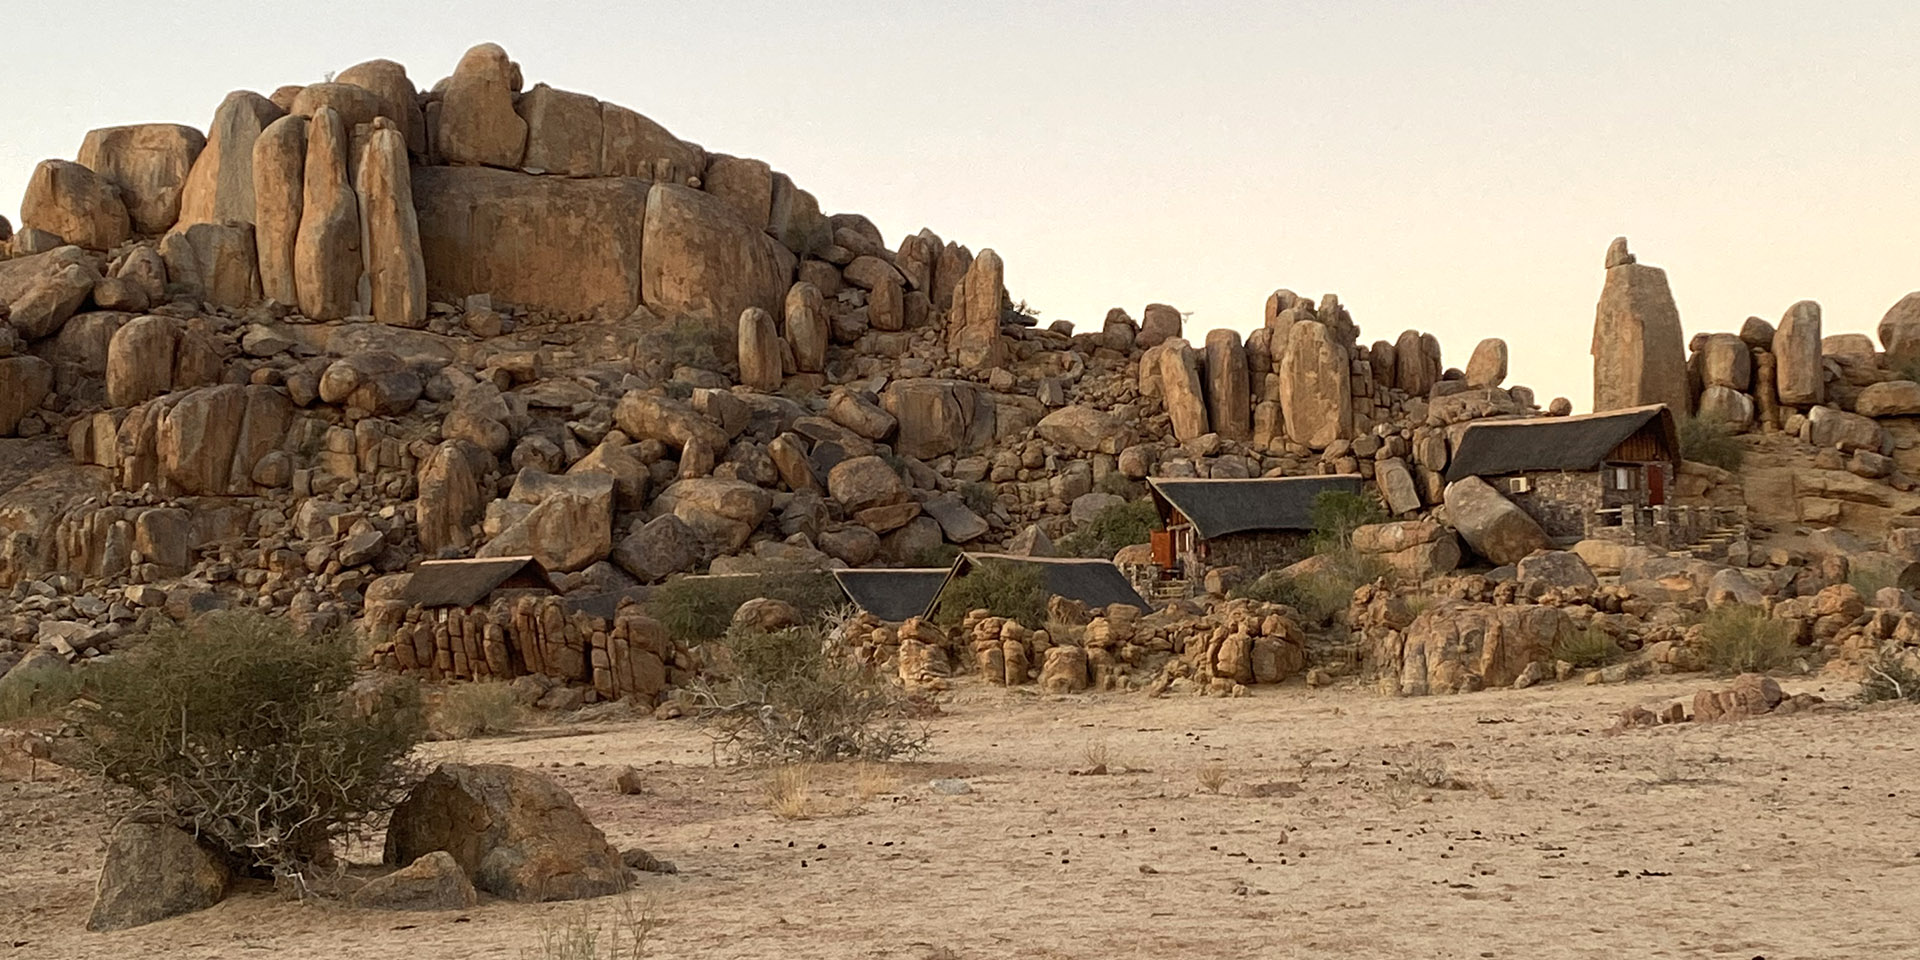 Chalets against rock cliff, Canyon Lodge, Namibia